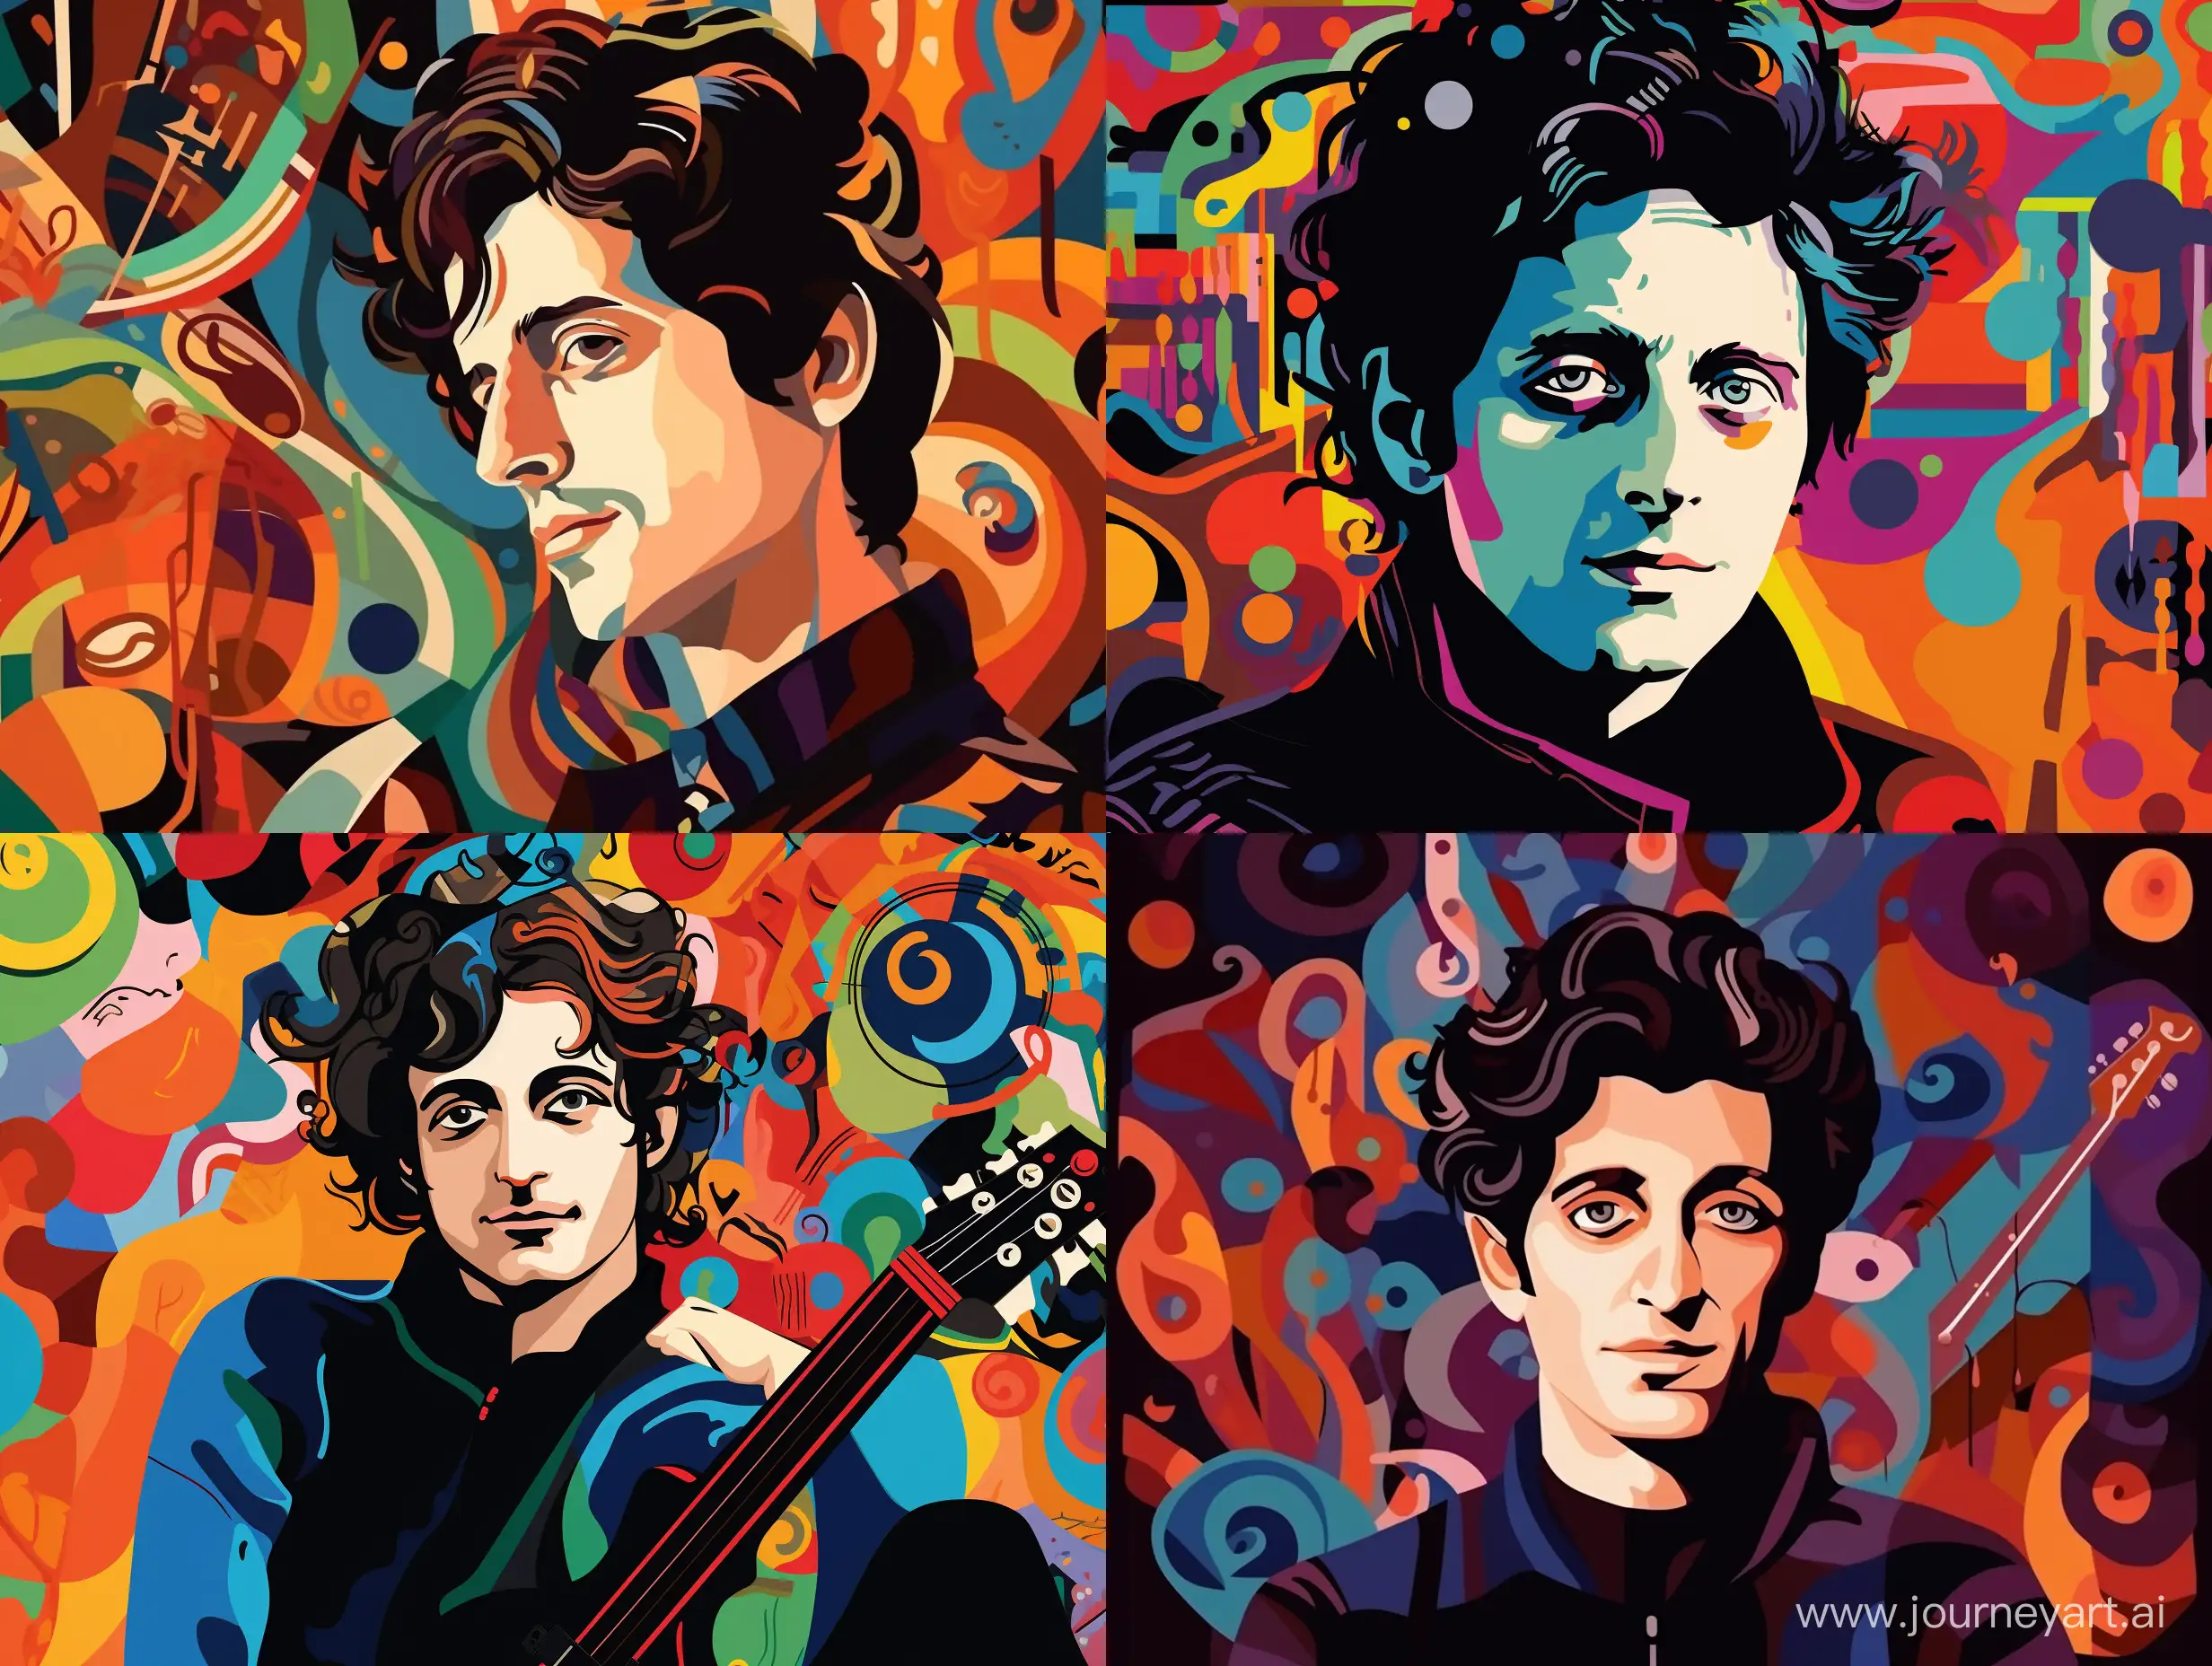 Portrait of Joe Dassin, young, looking straight at the background of musical symbols, complex colors, cartoon style, caricature, pop art style